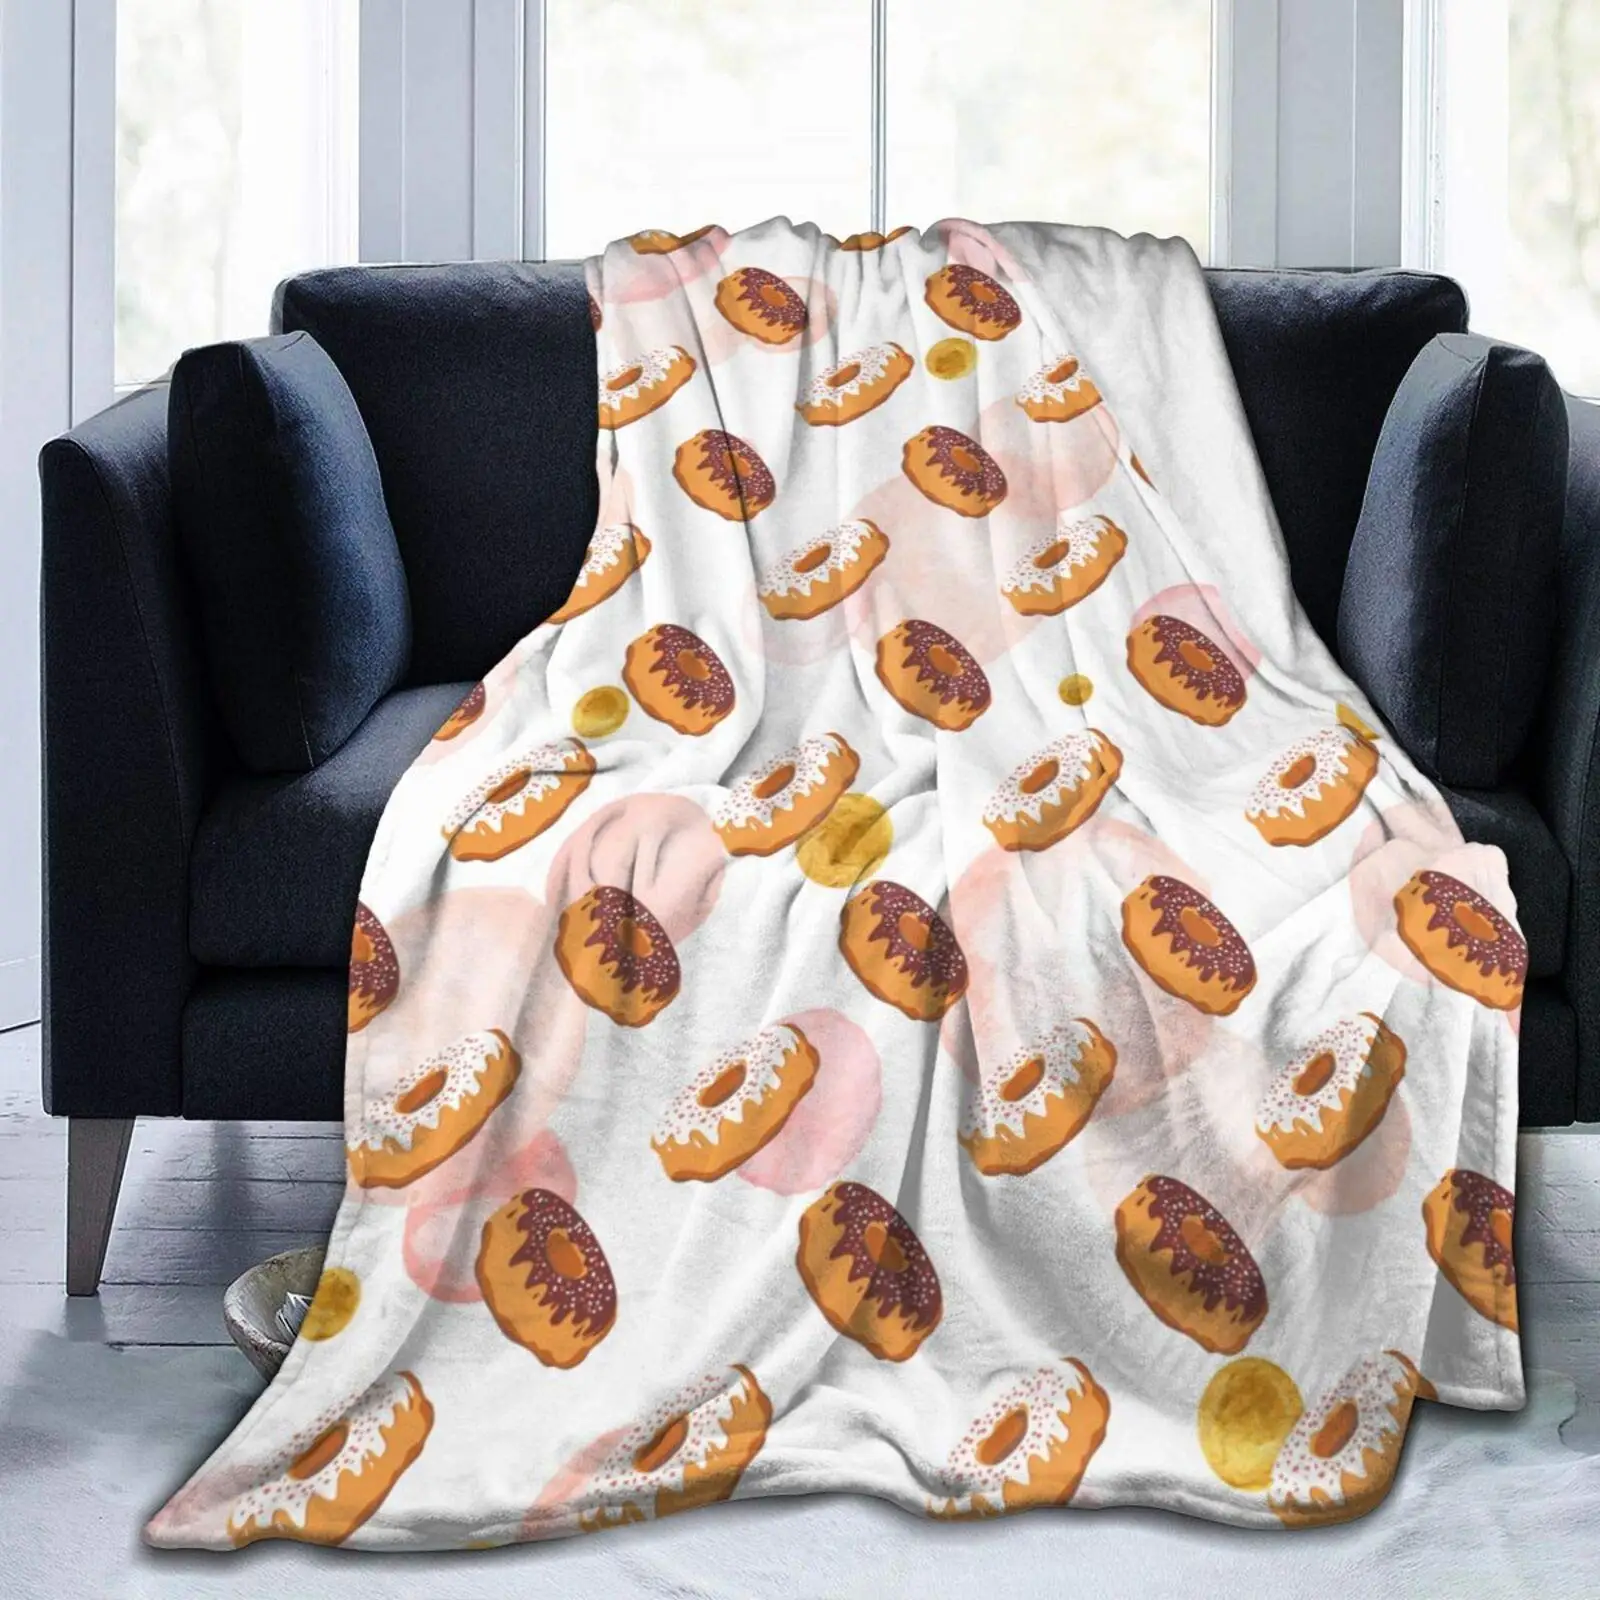 

Sweet Donuts Blanket Flannel Throw Blanket Ultra Soft Micro Fleece Blanket Bed Couch Living Room 100x120cm for Baby